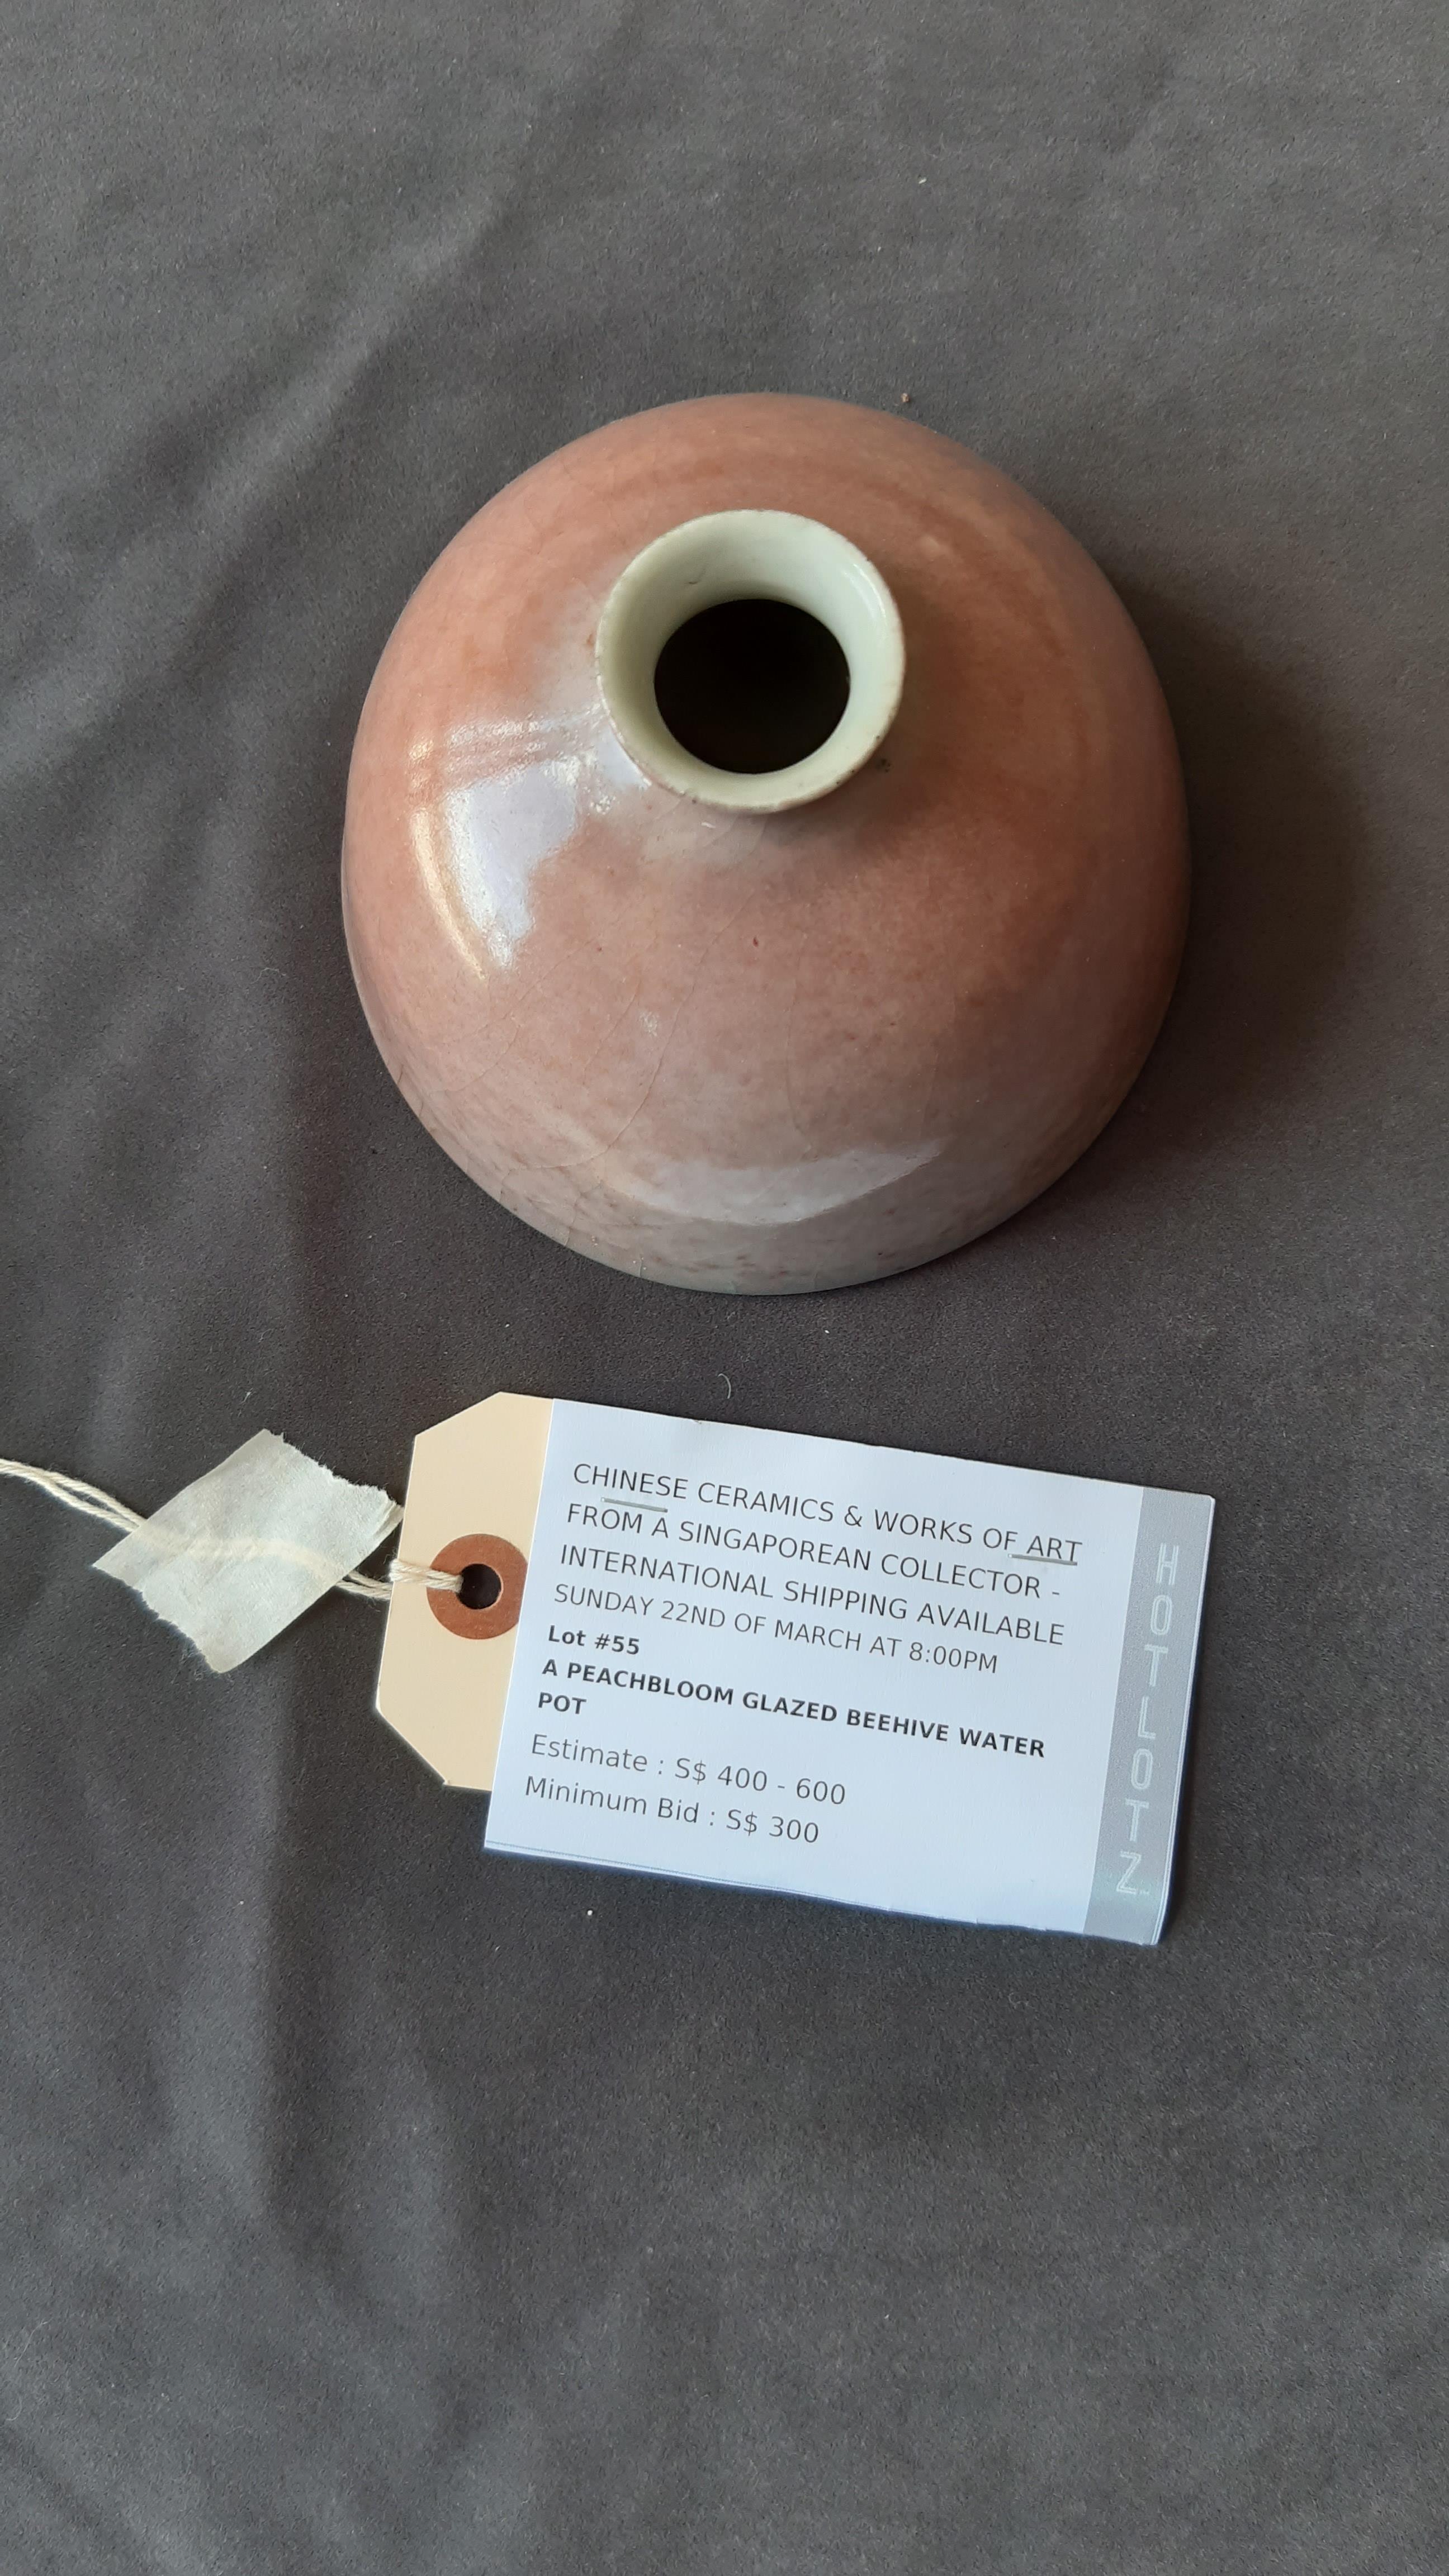 A PEACHBLOOM GLAZED BEEHIVE WATER POT - Image 3 of 11